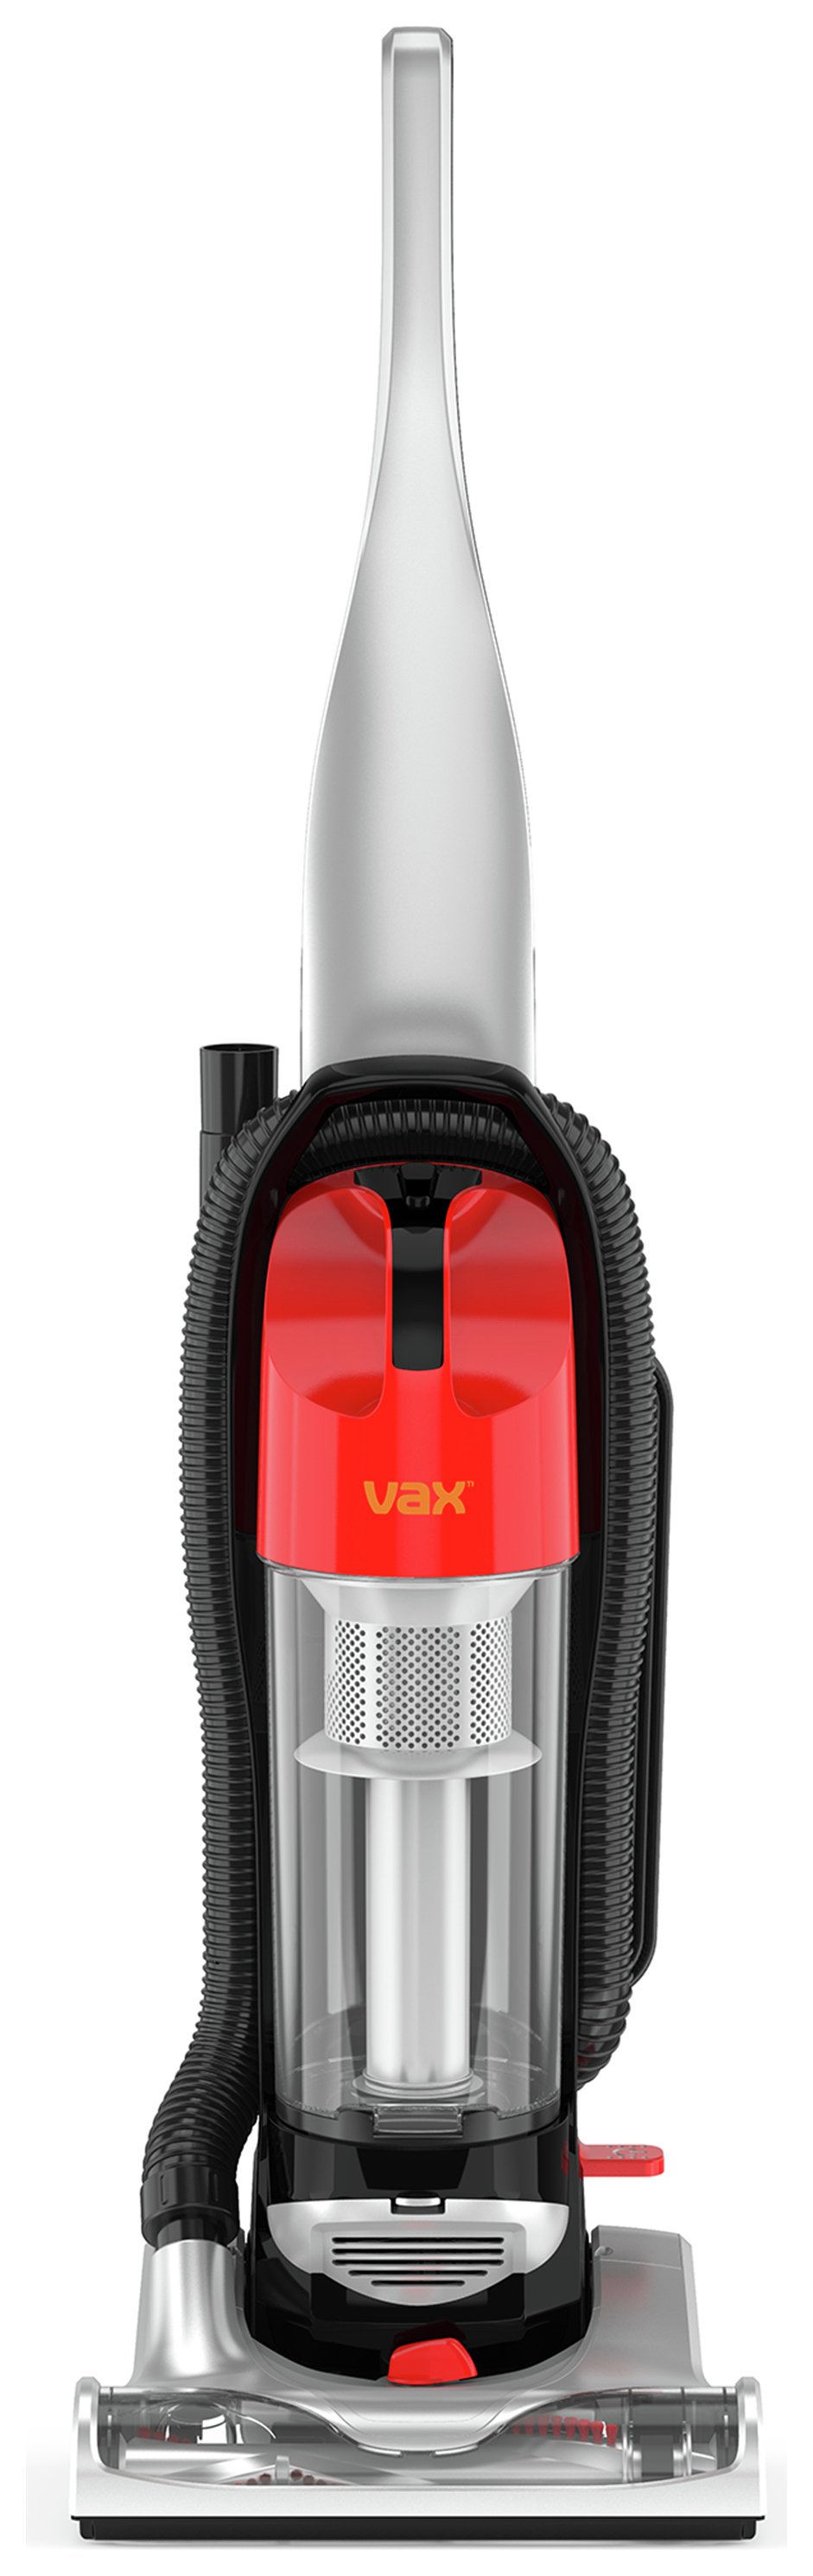 Vax - AWU01 Power Nano Bagless Upright Vacuum Cleaner Review